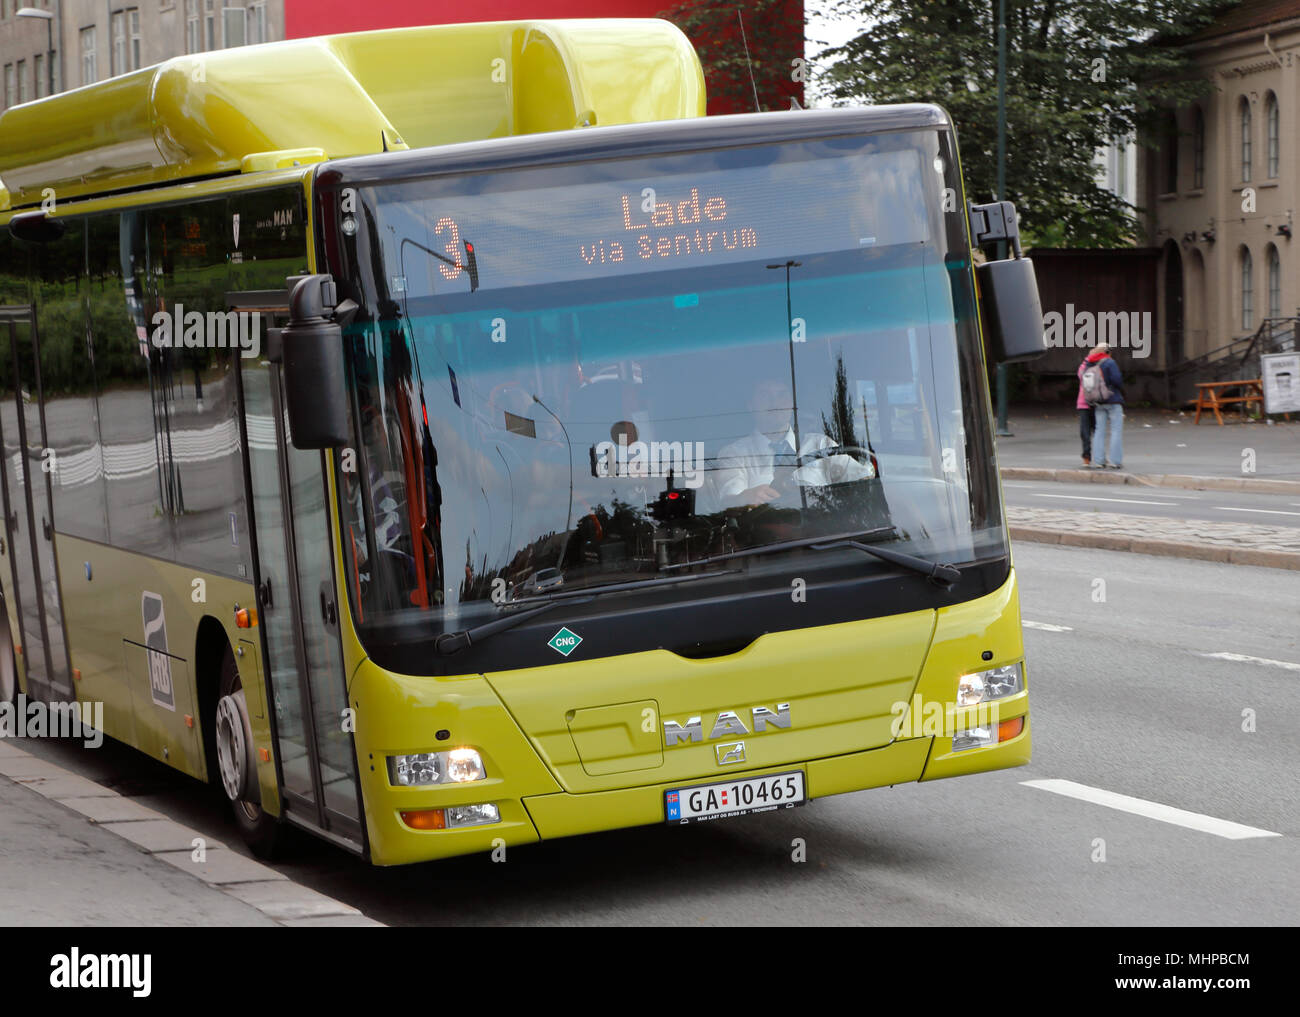 Trondheim, Norway - August 31, 2013: A M.A.N city bus in traffic for AtB on line 3 Stock Photo